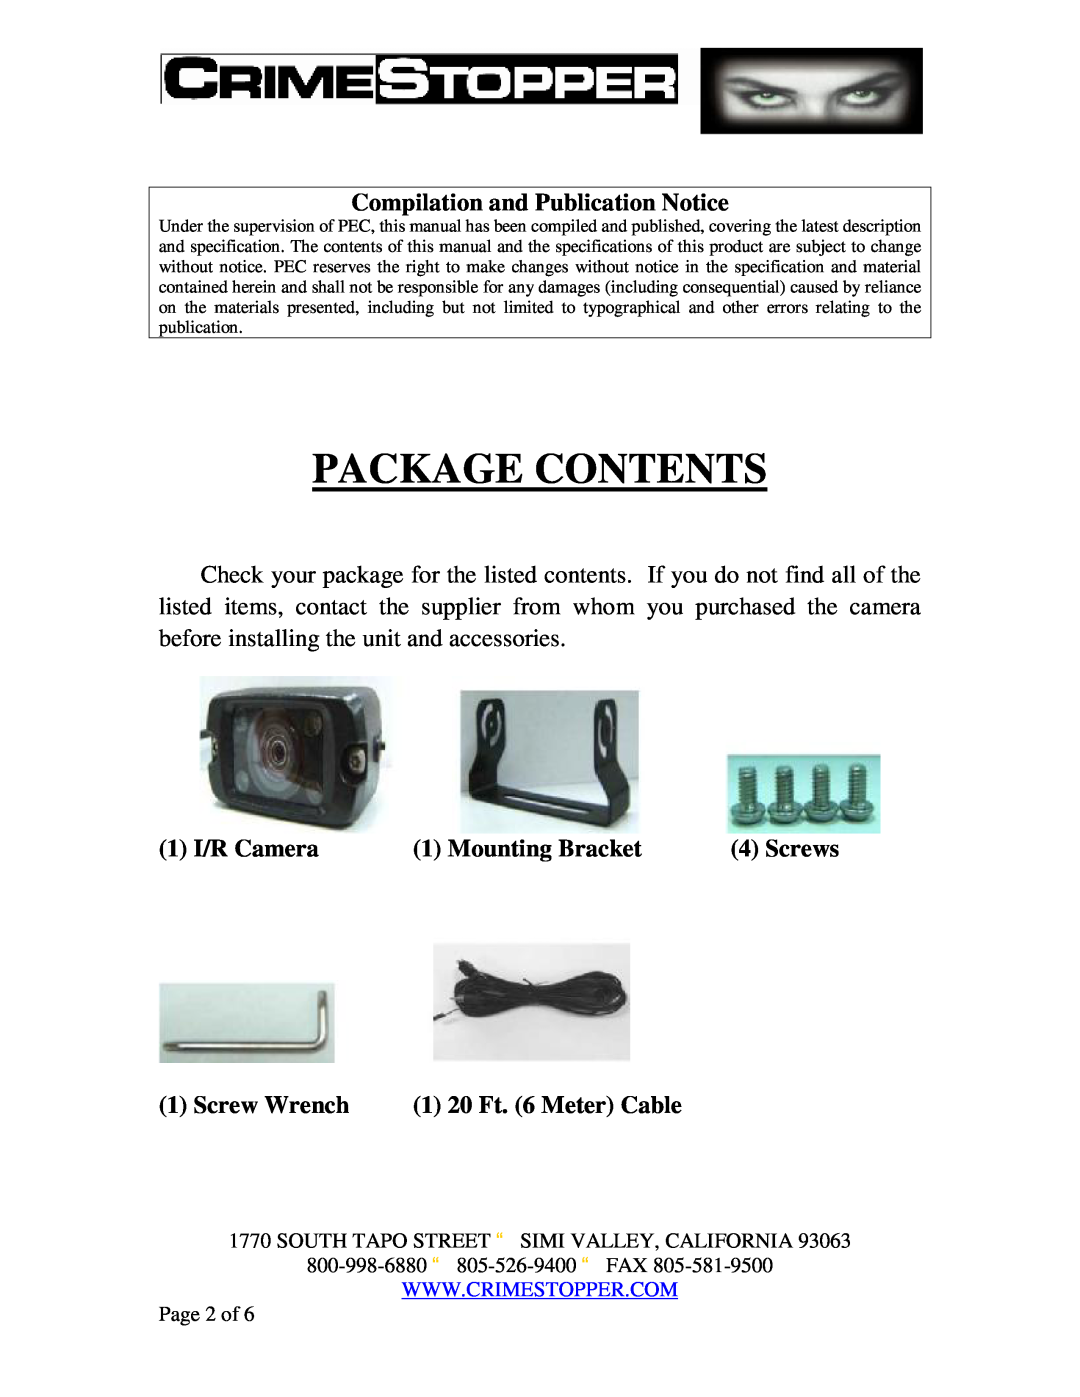 Crimestopper Security Products SV-6600 I/R Package Contents, Compilation and Publication Notice, 1 I/R Camera, Screws 